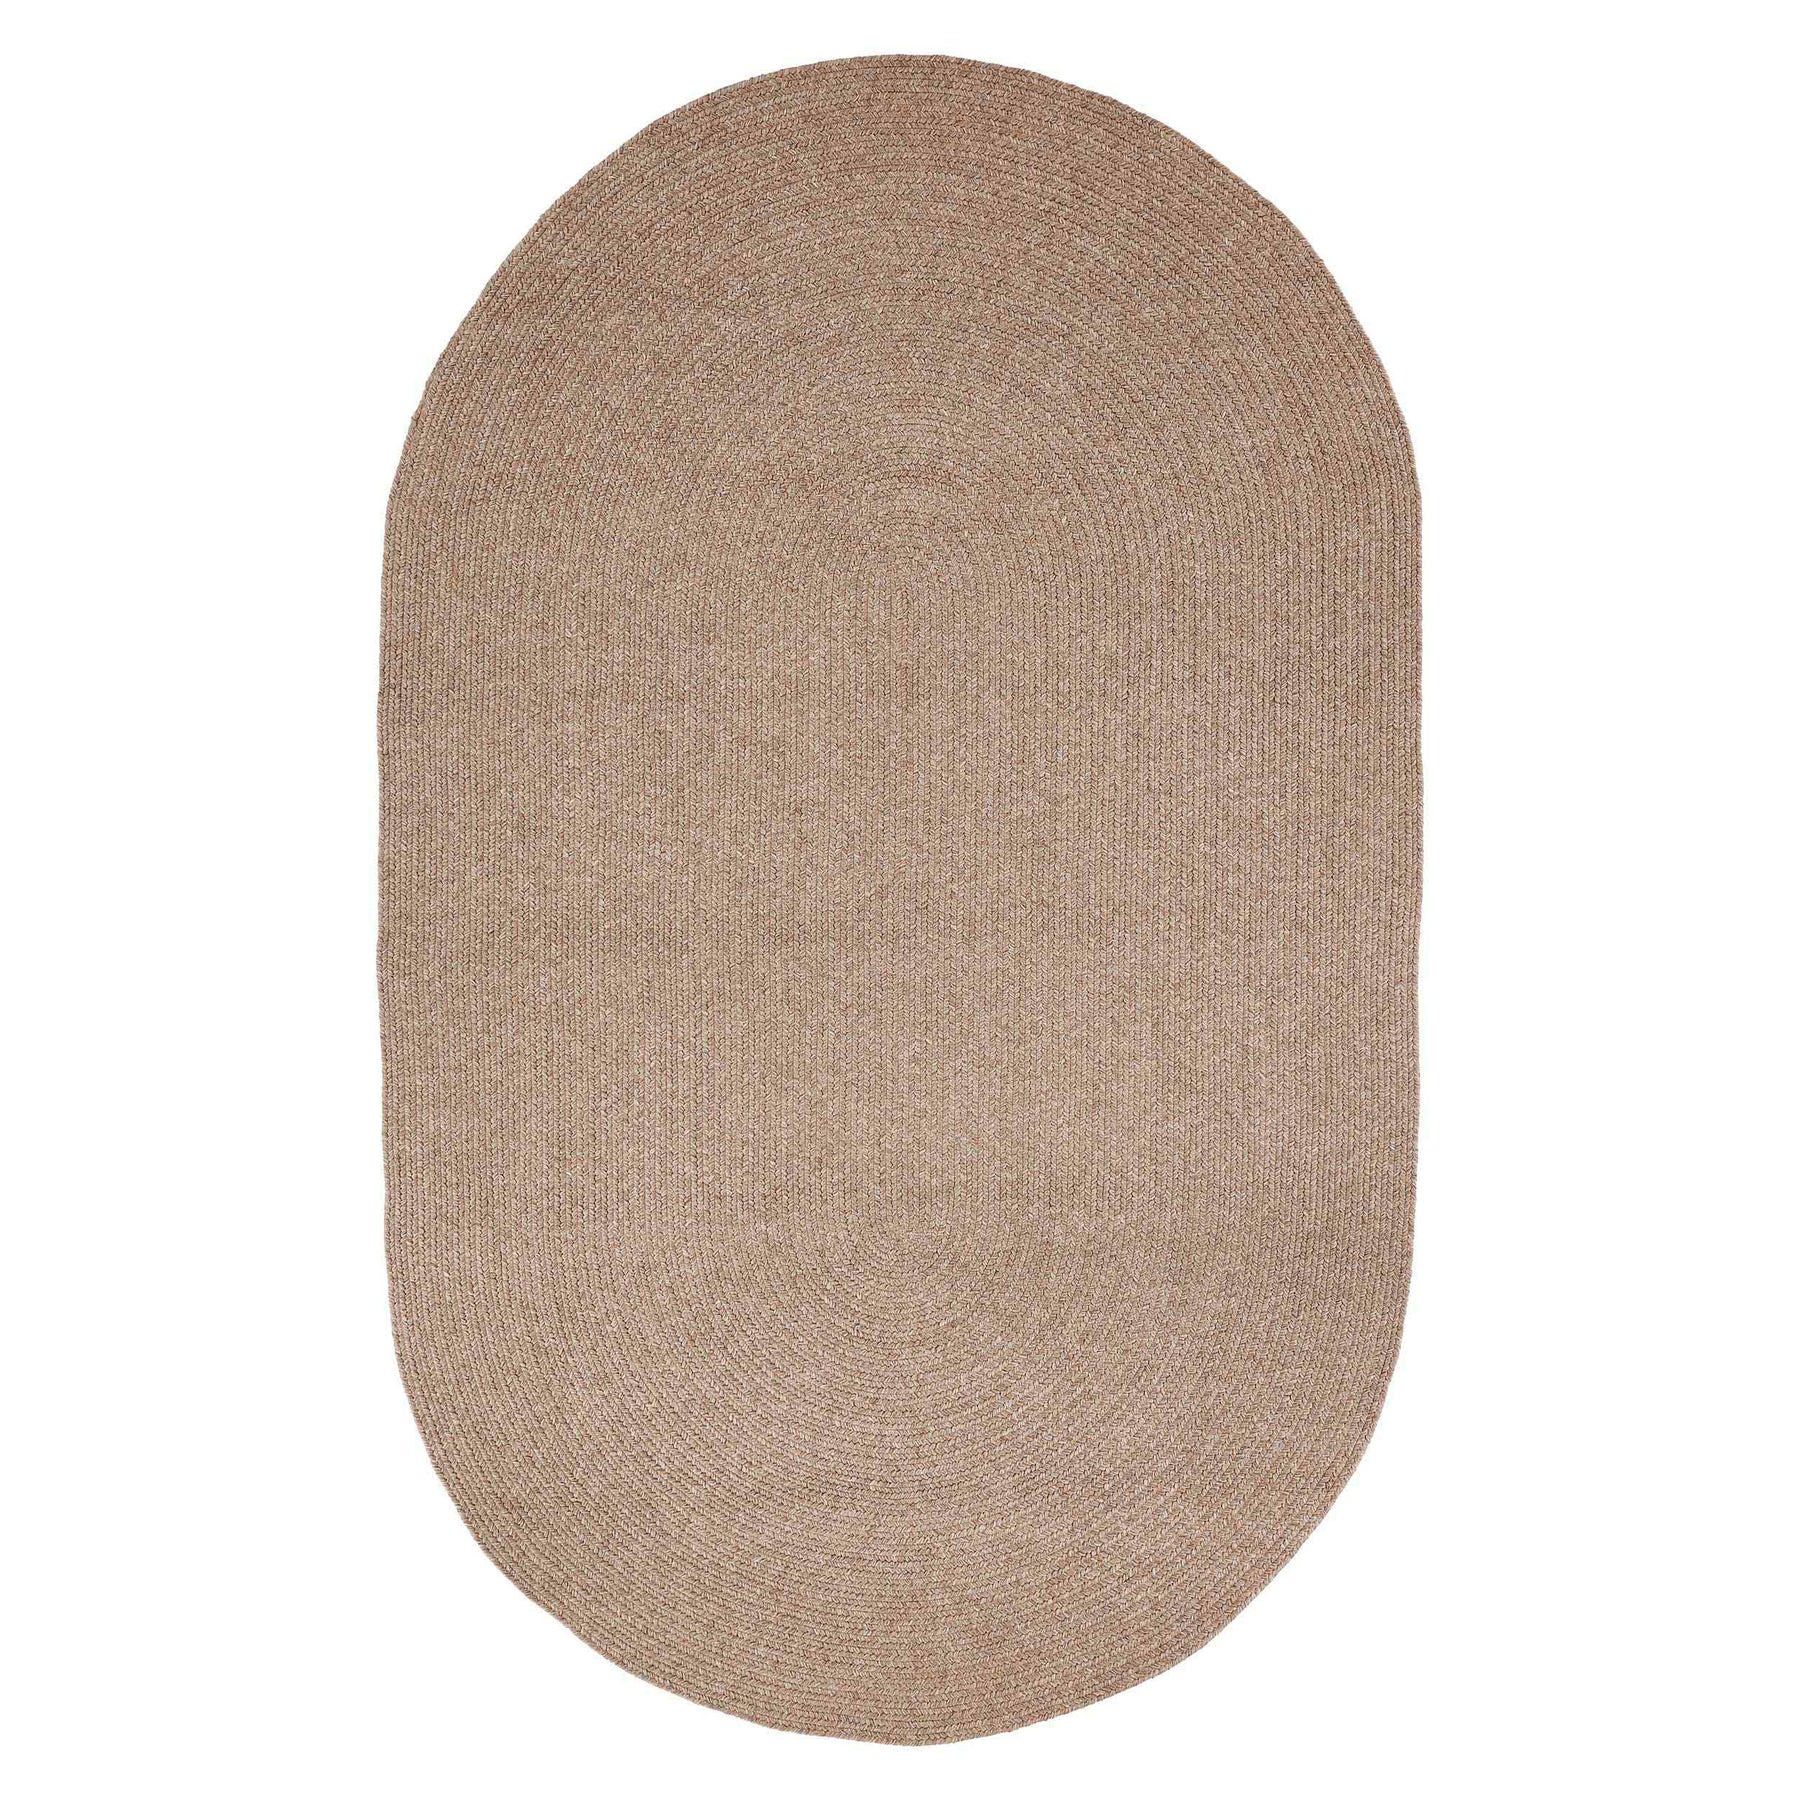 Classic Braided Weave Oval Area Rug Indoor Outdoor Rugs - Latte